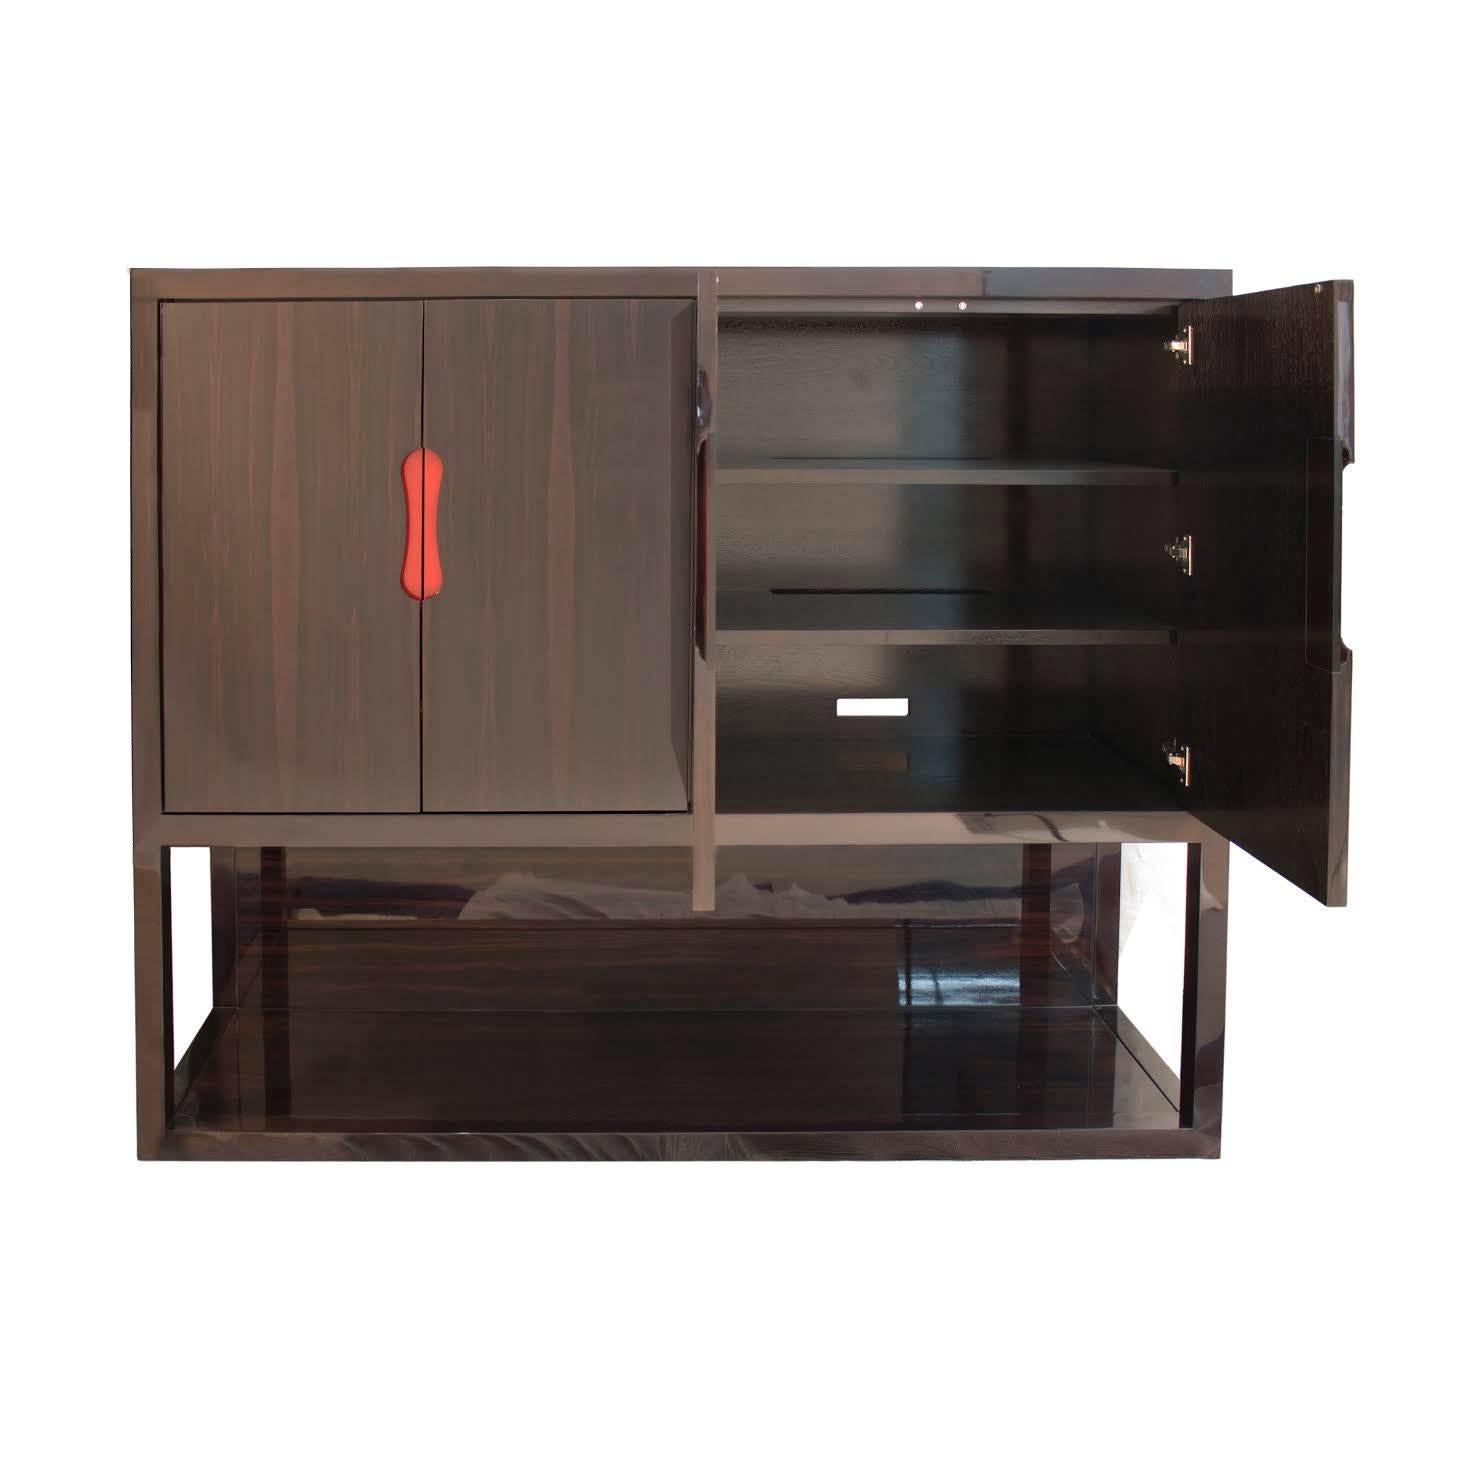 Cabinet with four doors and side panels in Macassar ebony, high gloss full fill. Frame in walnut stained to match. Recessed handles in red polished lacquer. Shelves are adjustable.